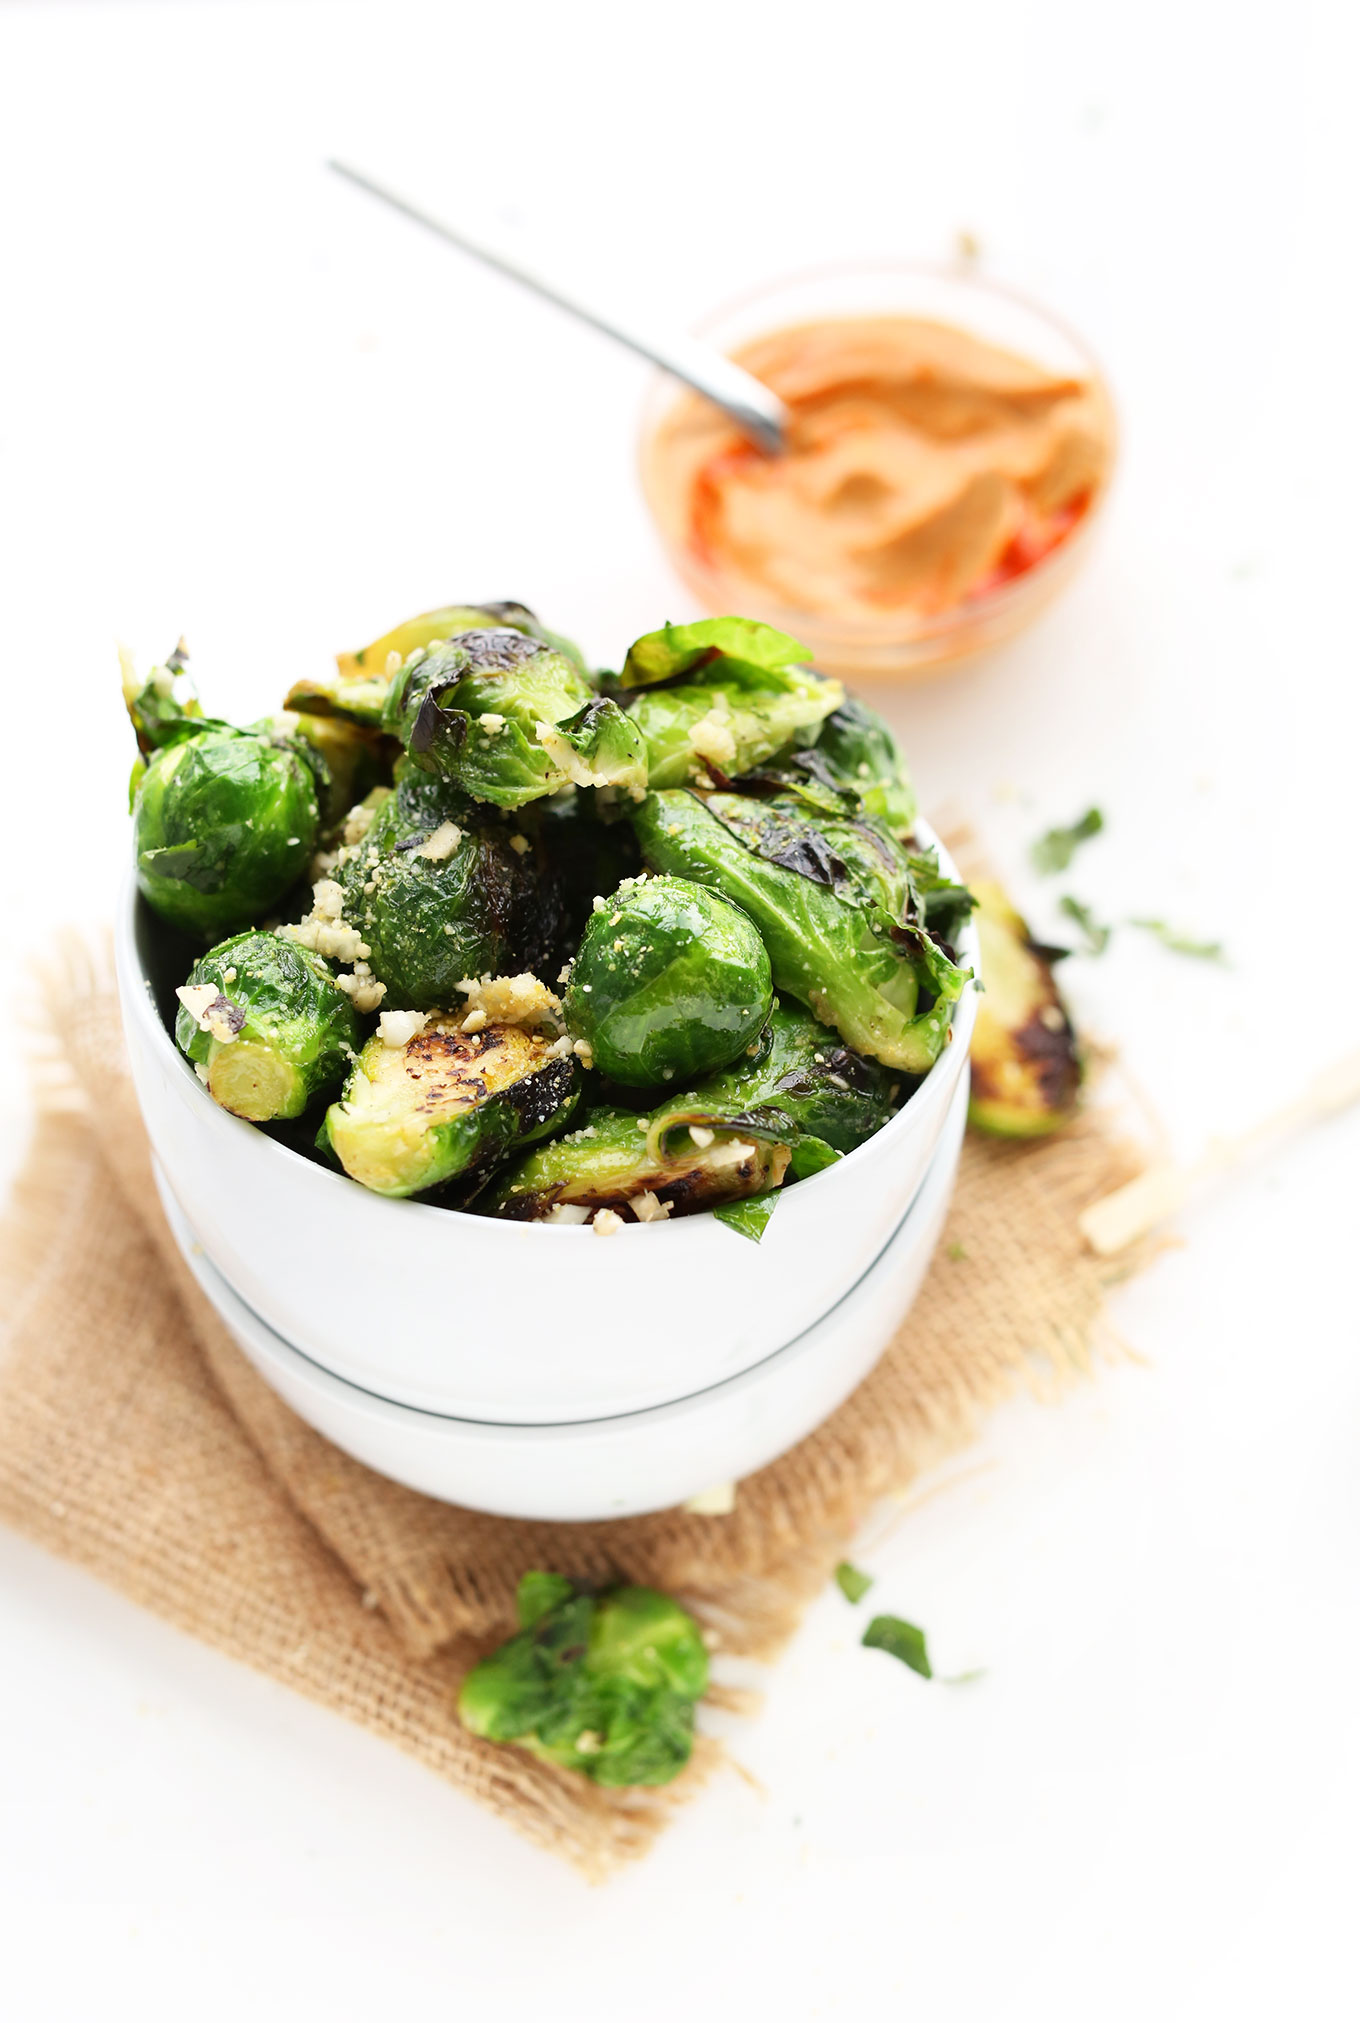 Bowl of Crispy Roasted Brussels Sprouts to be dipped in our spicy Sriracha Aioli recipe